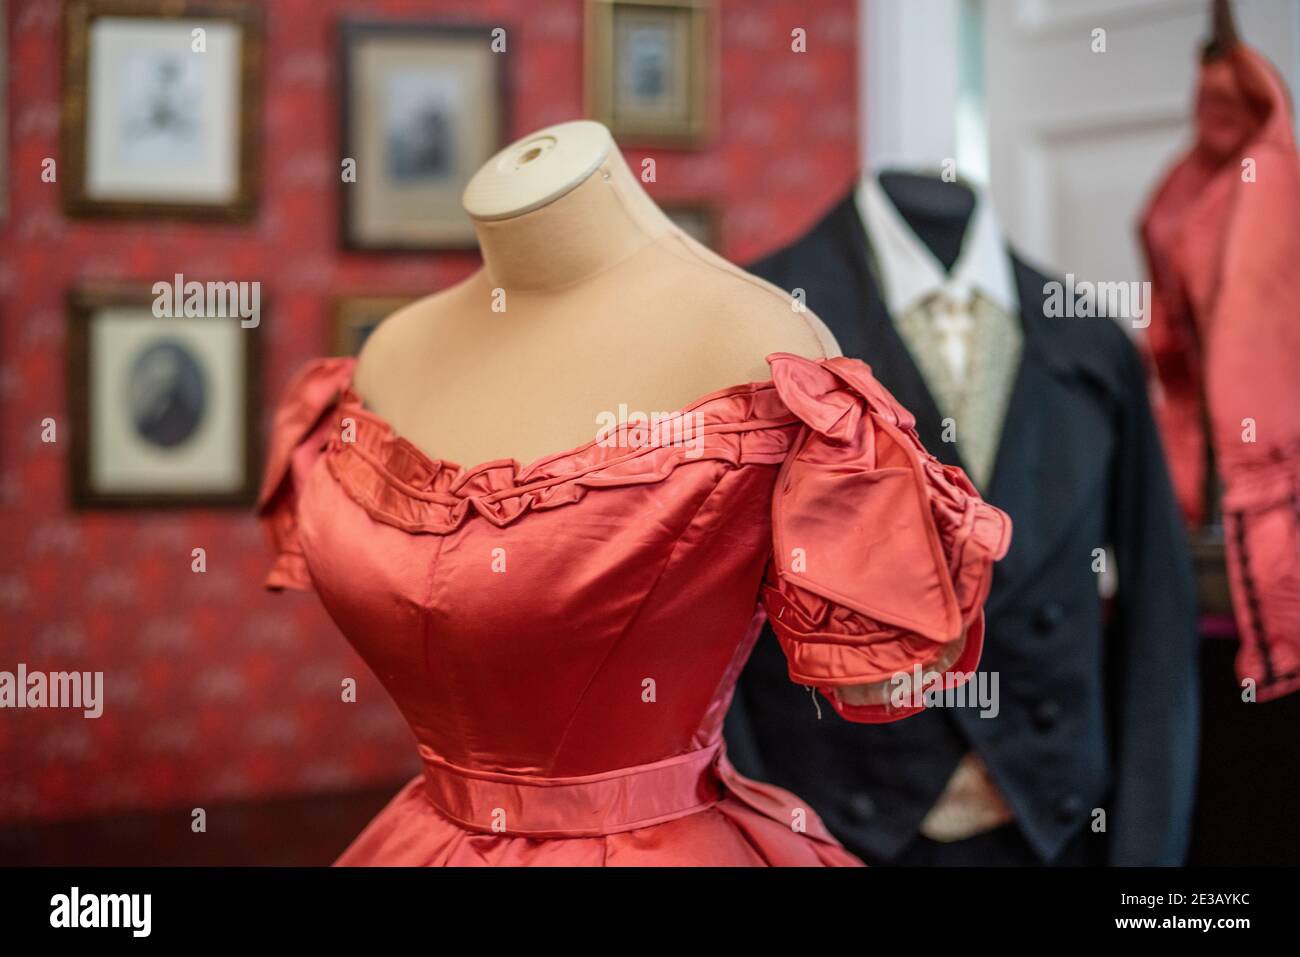 Display  featuring the low cut bodice of a period gown at the Volkonsky Manor at the Irkutsk Regional Historic Memorial Decembrists' Museum. Stock Photo